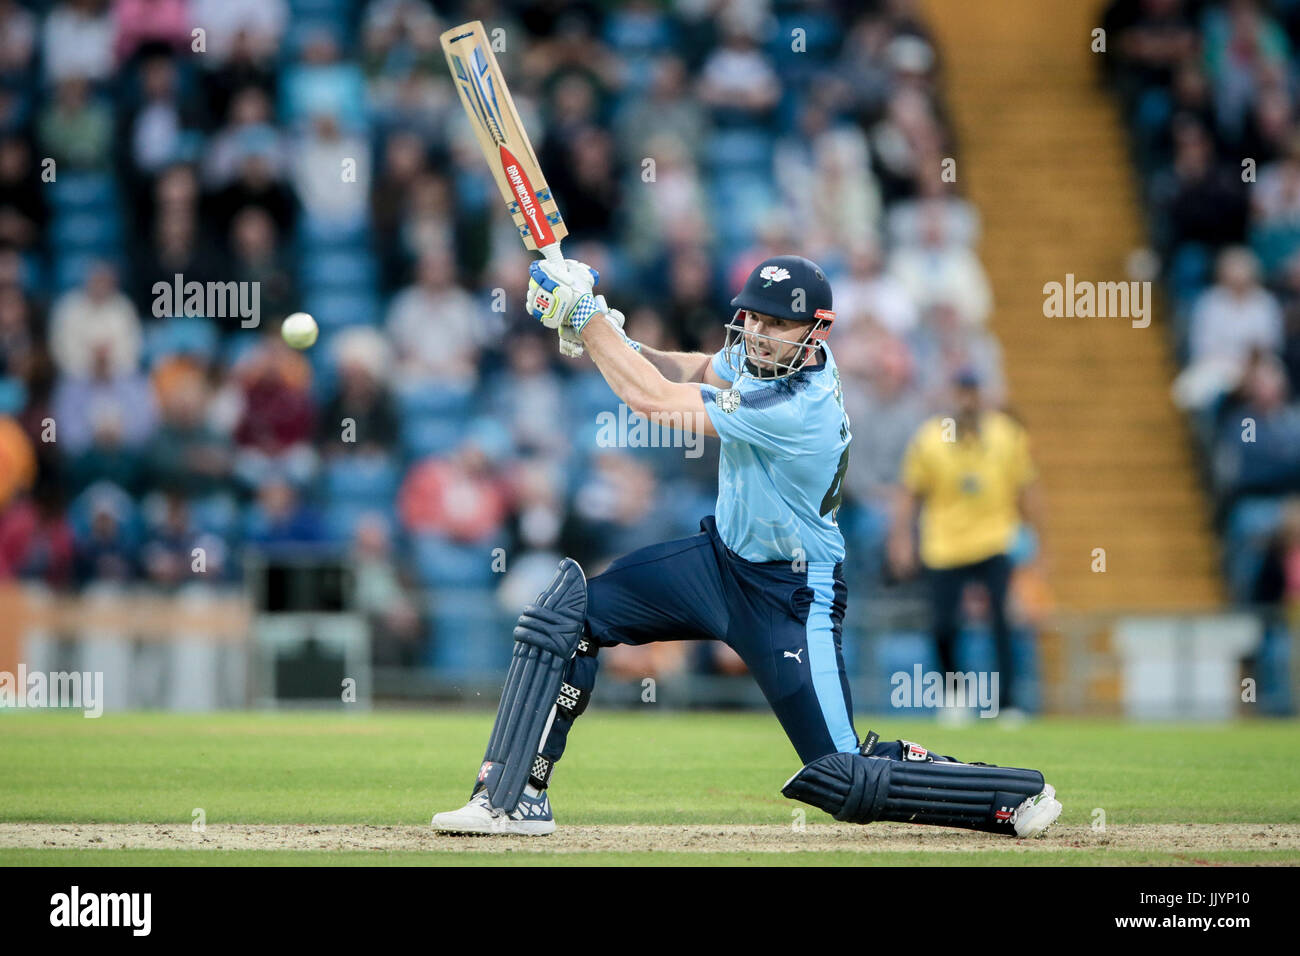 Leeds, UK. 21st July, 2017. SE Marsh (43) hits the ball to the boundary for 4 as Yorkshire Vikings reach 179 for 5 in their 20 overs during the Natwest T20 Blast game between Yorkshire County Cricket Club v Warwickshire County Cricket Club on Friday 21 July 2017. Photo by Mark P Doherty. Credit: Caught Light Photography Limited/Alamy Live News Stock Photo